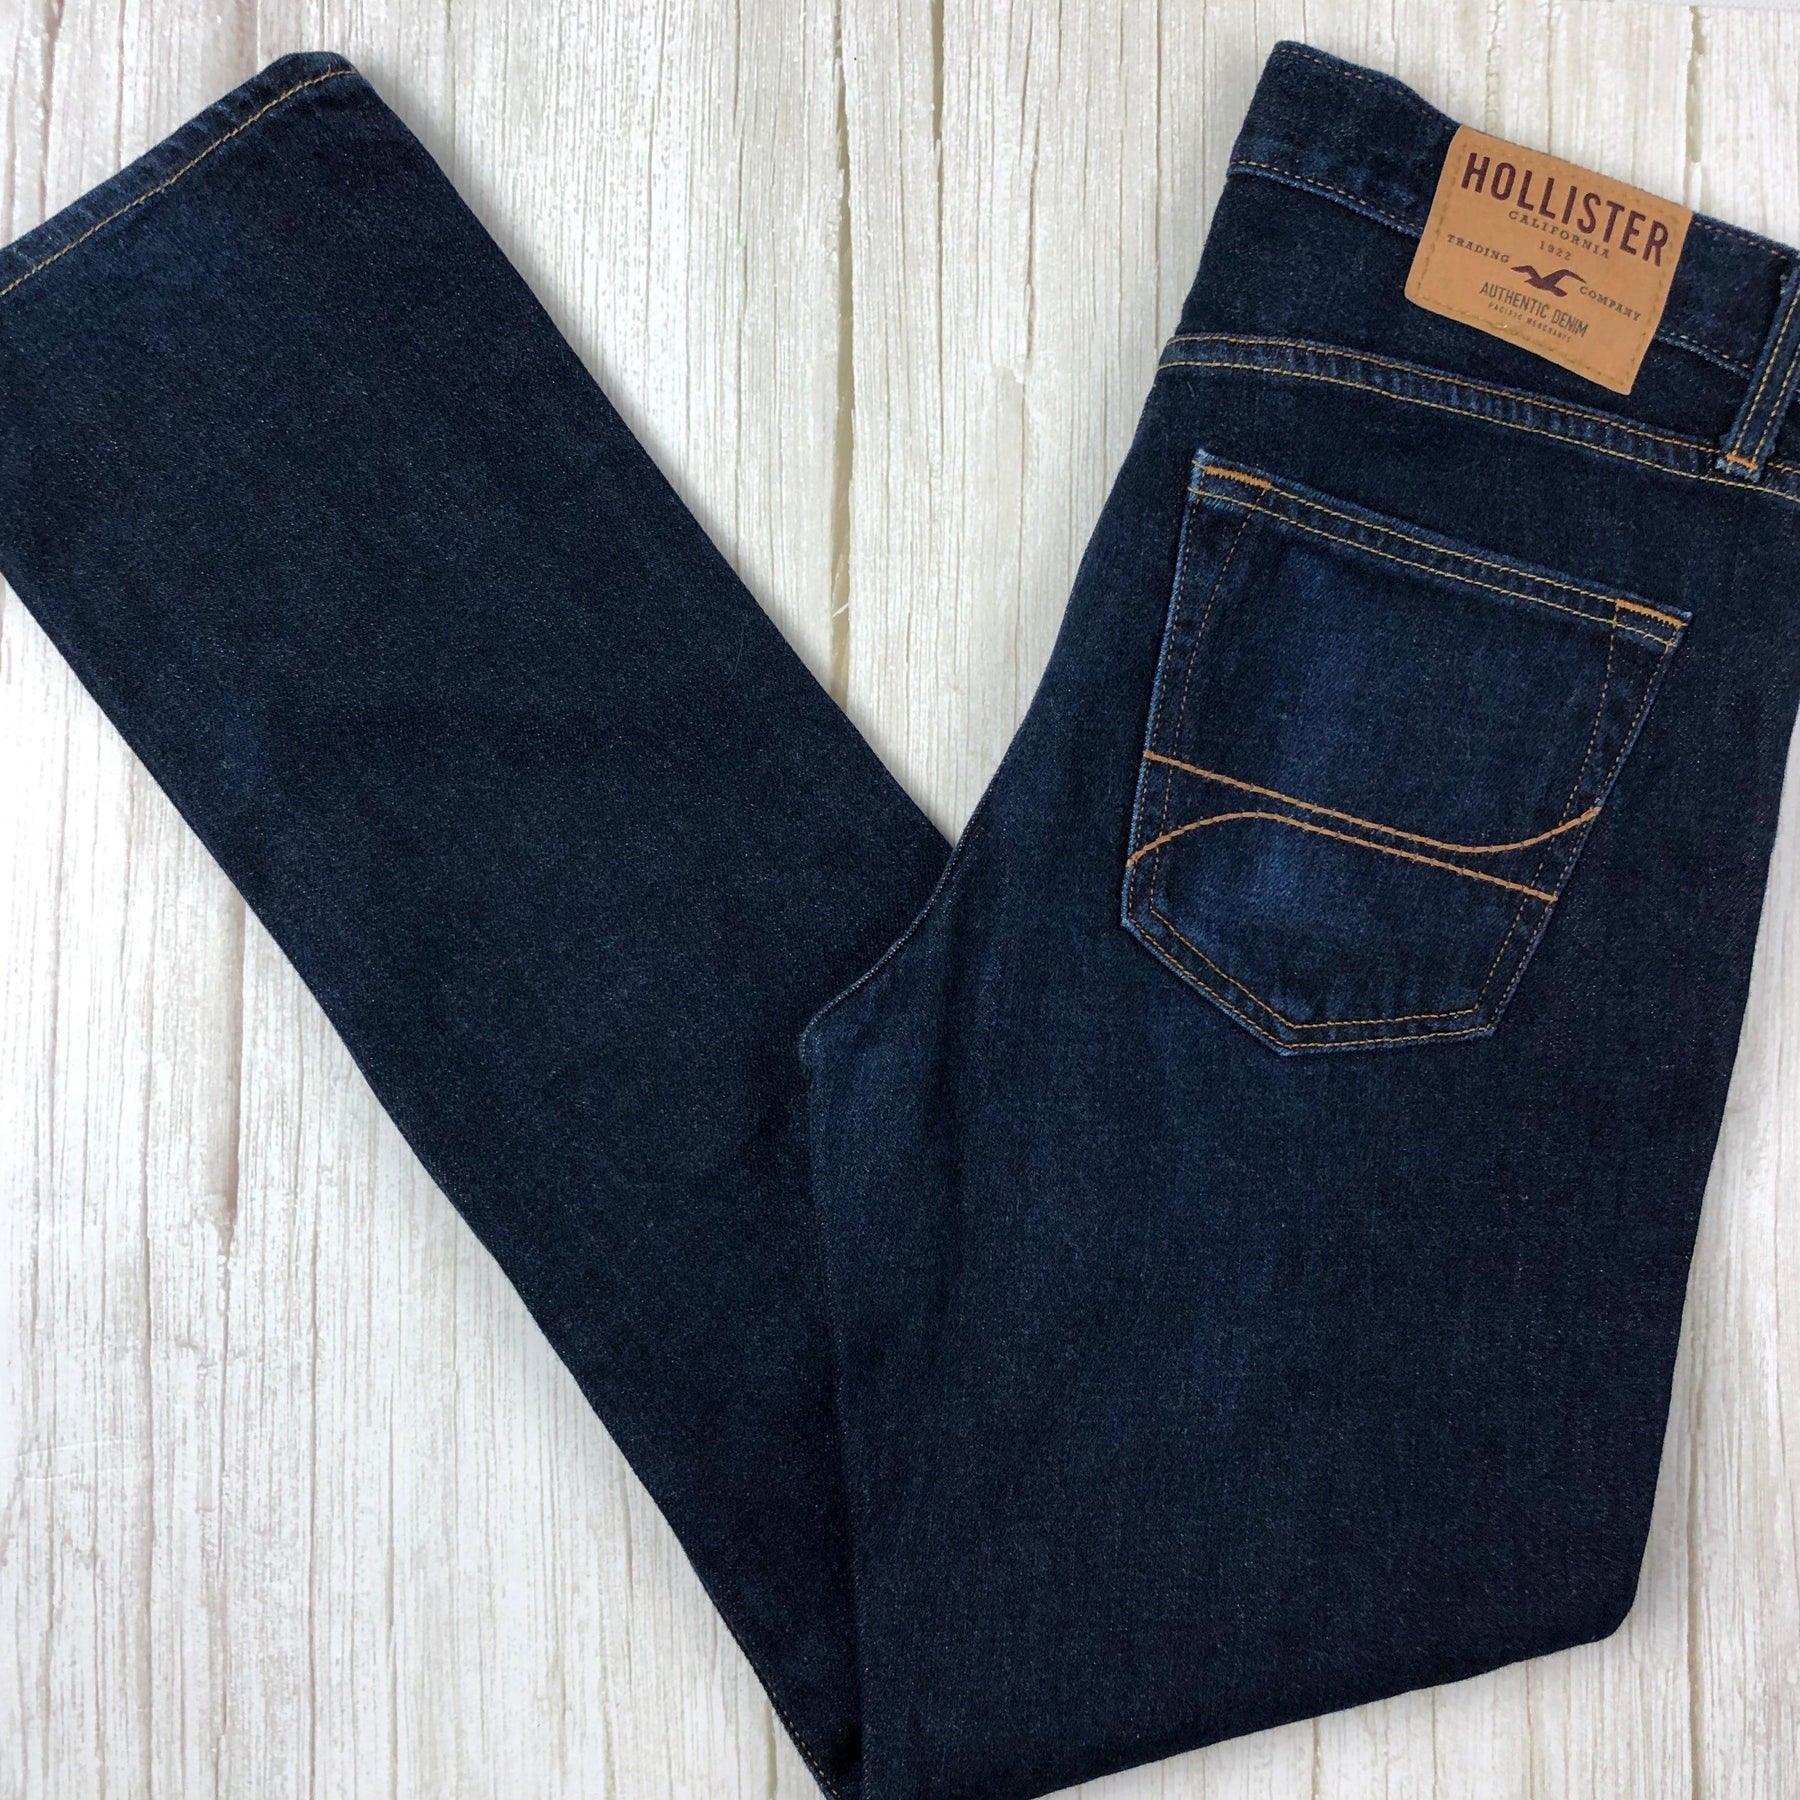 hollister classic taper jeans